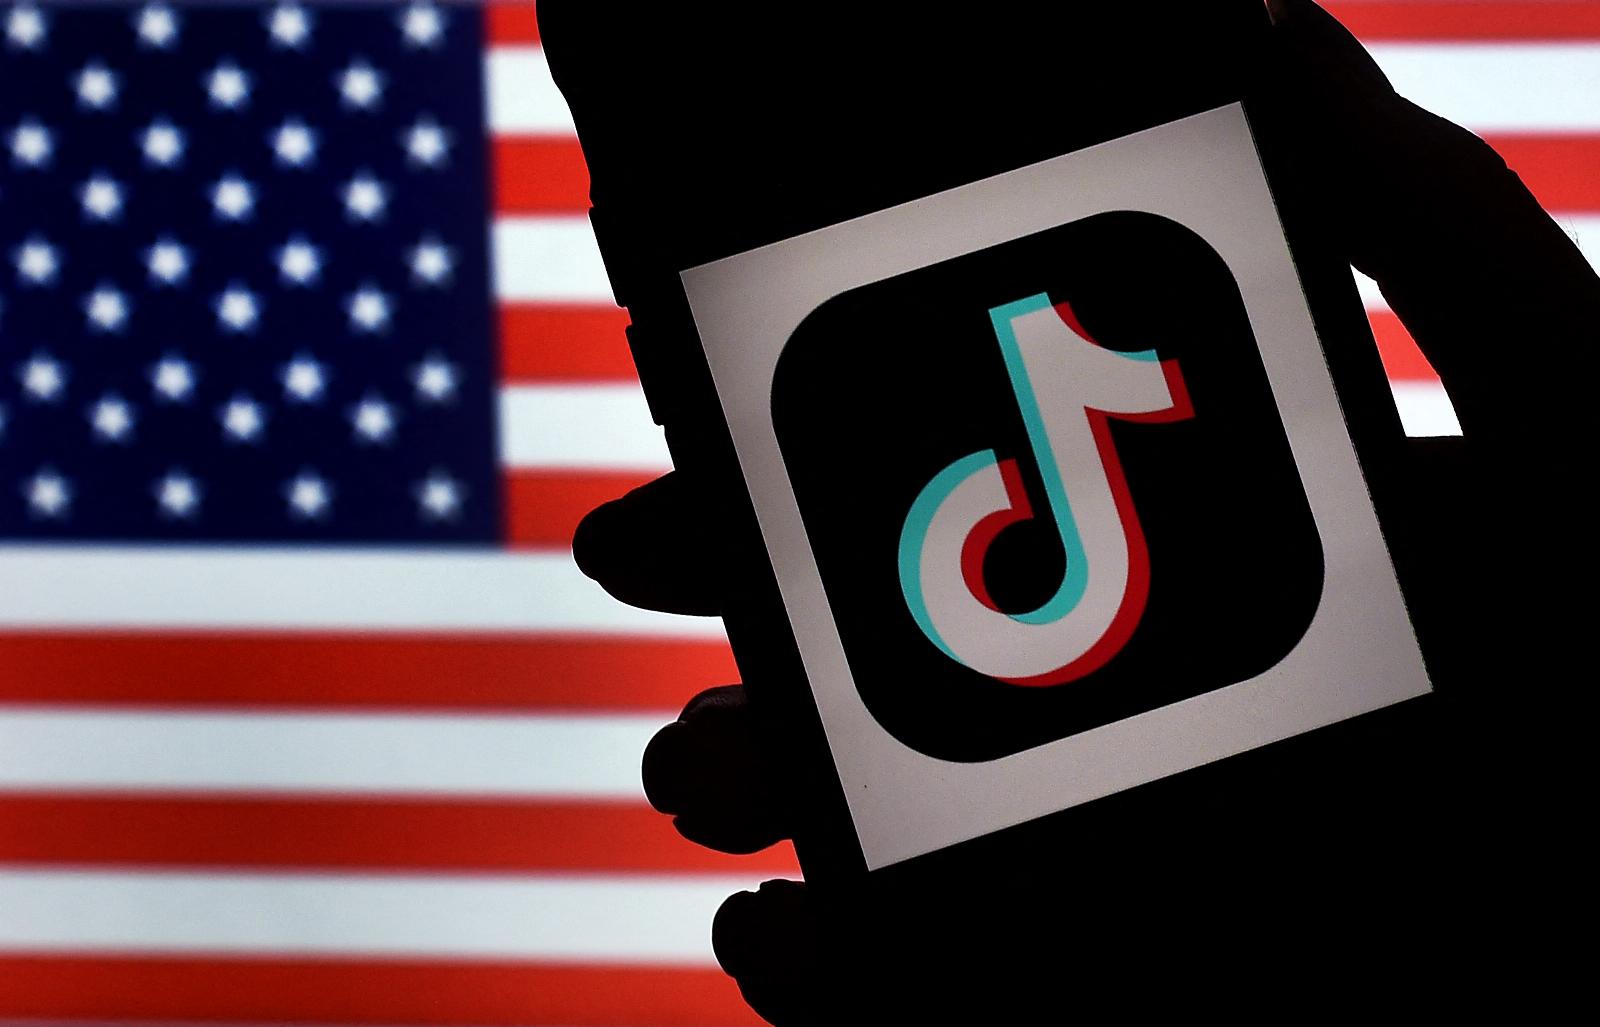 Is TikTok getting banned? Not yet, but you should explore alternatives